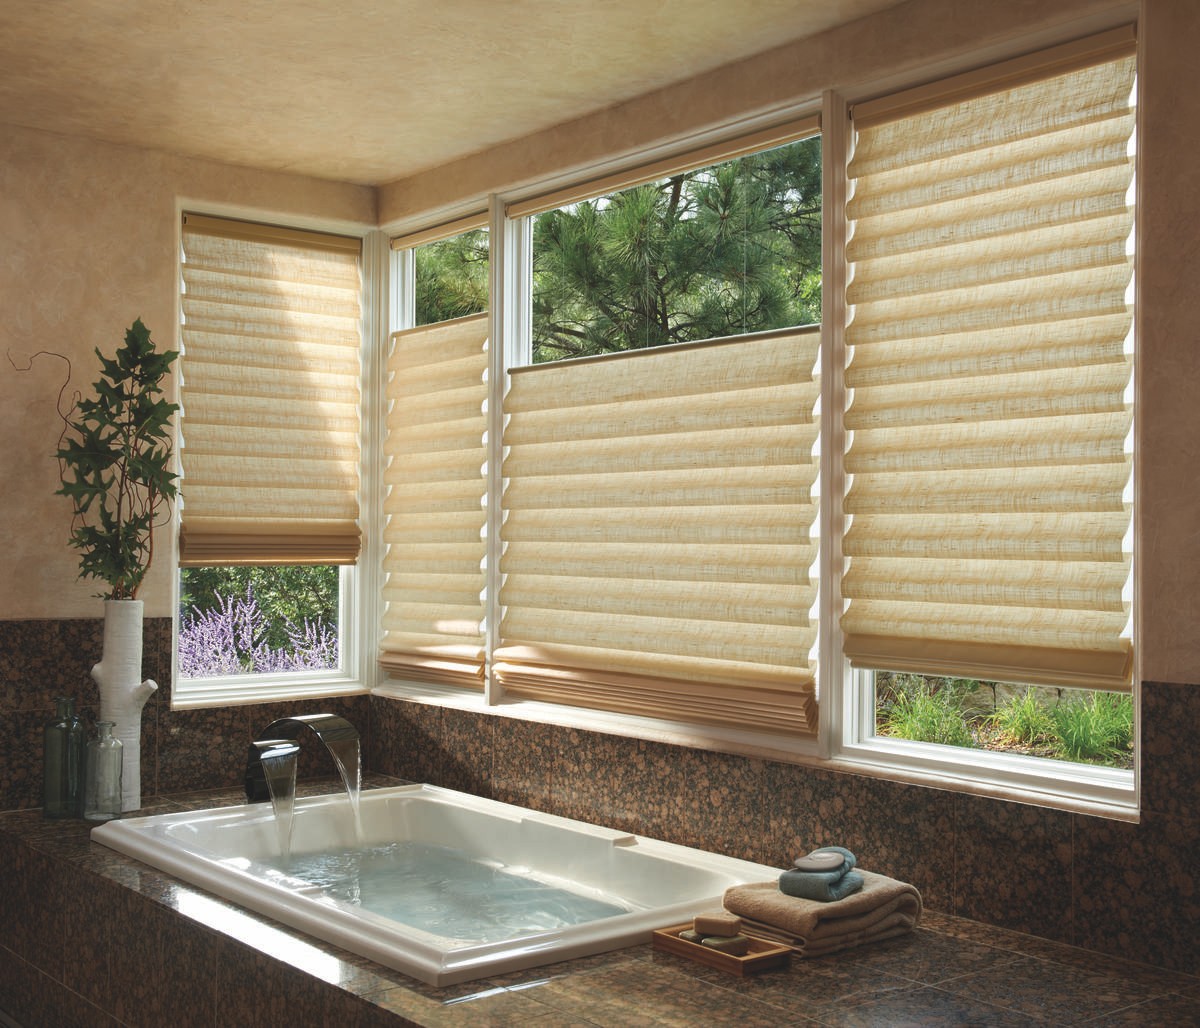 Upgrade your Home with Elegant Roman Shades, Featuring Vignette® by Hunter Douglas, near Bloomington, Illinois (IL)